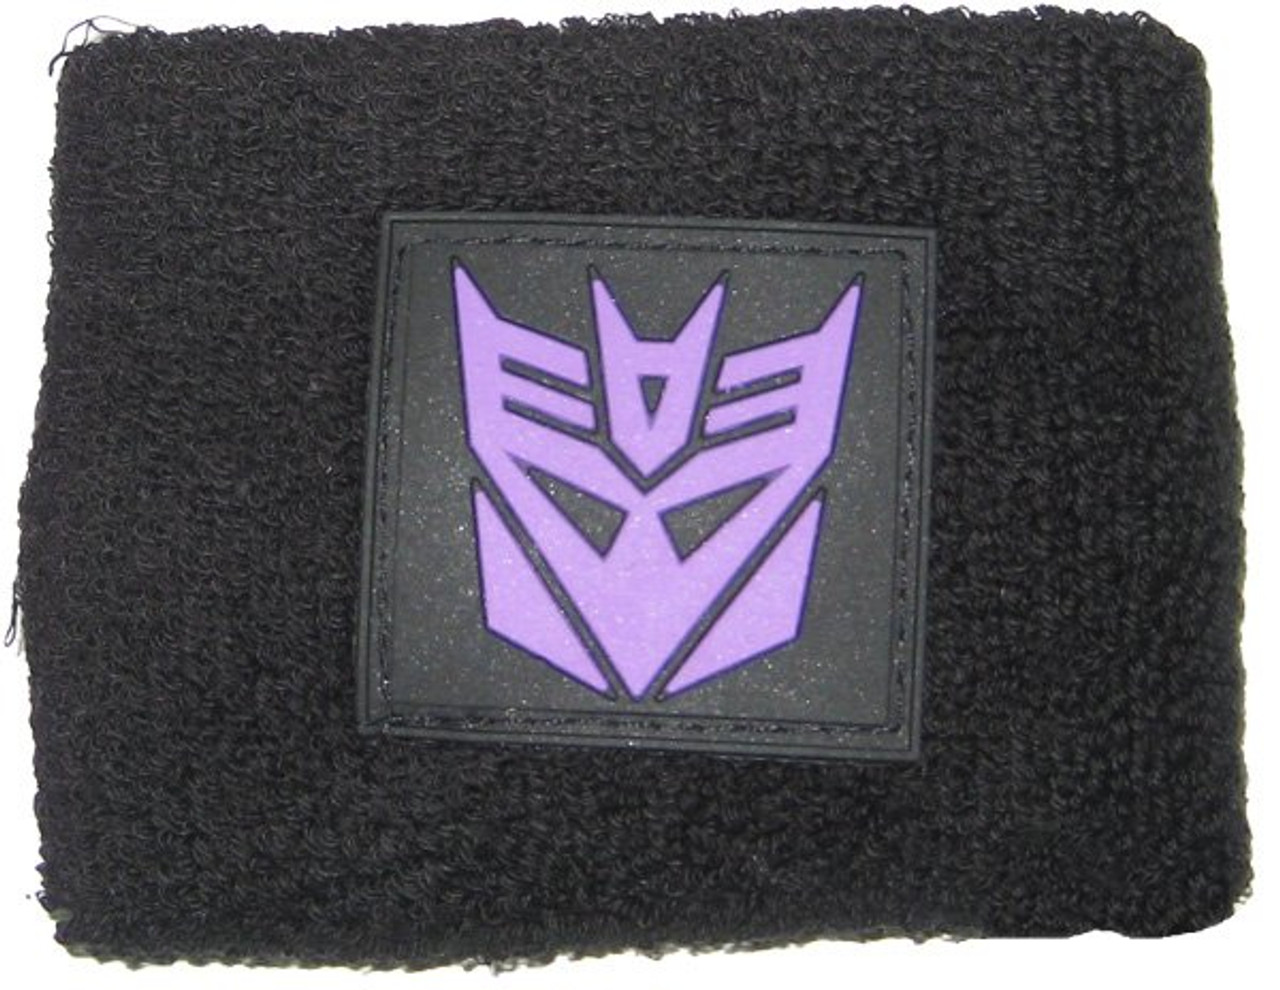 Transformers Decepticon Autobot Iron-on Embroidered Hard Rock Band Patch #295